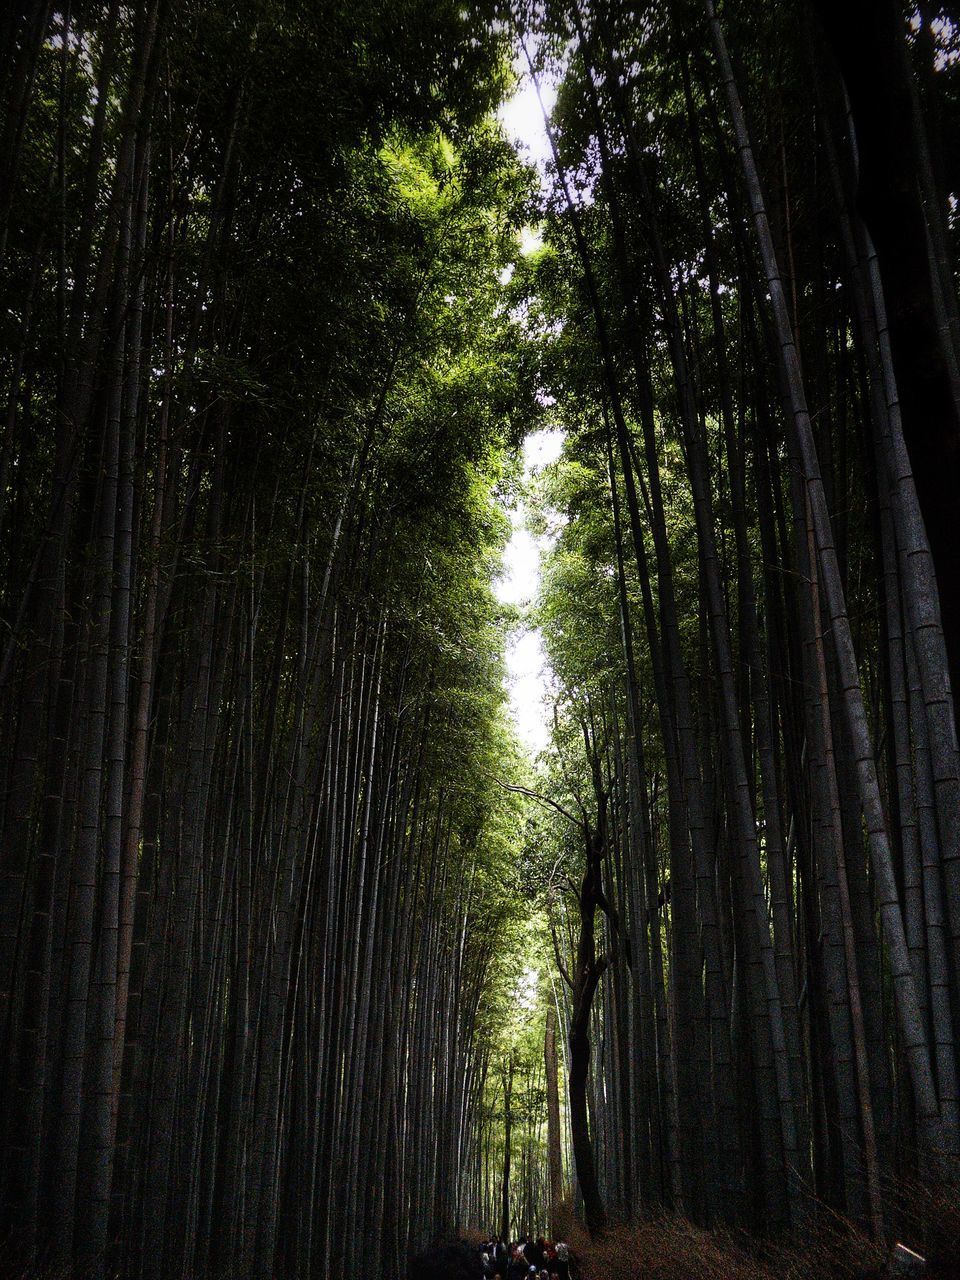 BAMBOO TREES IN FOREST